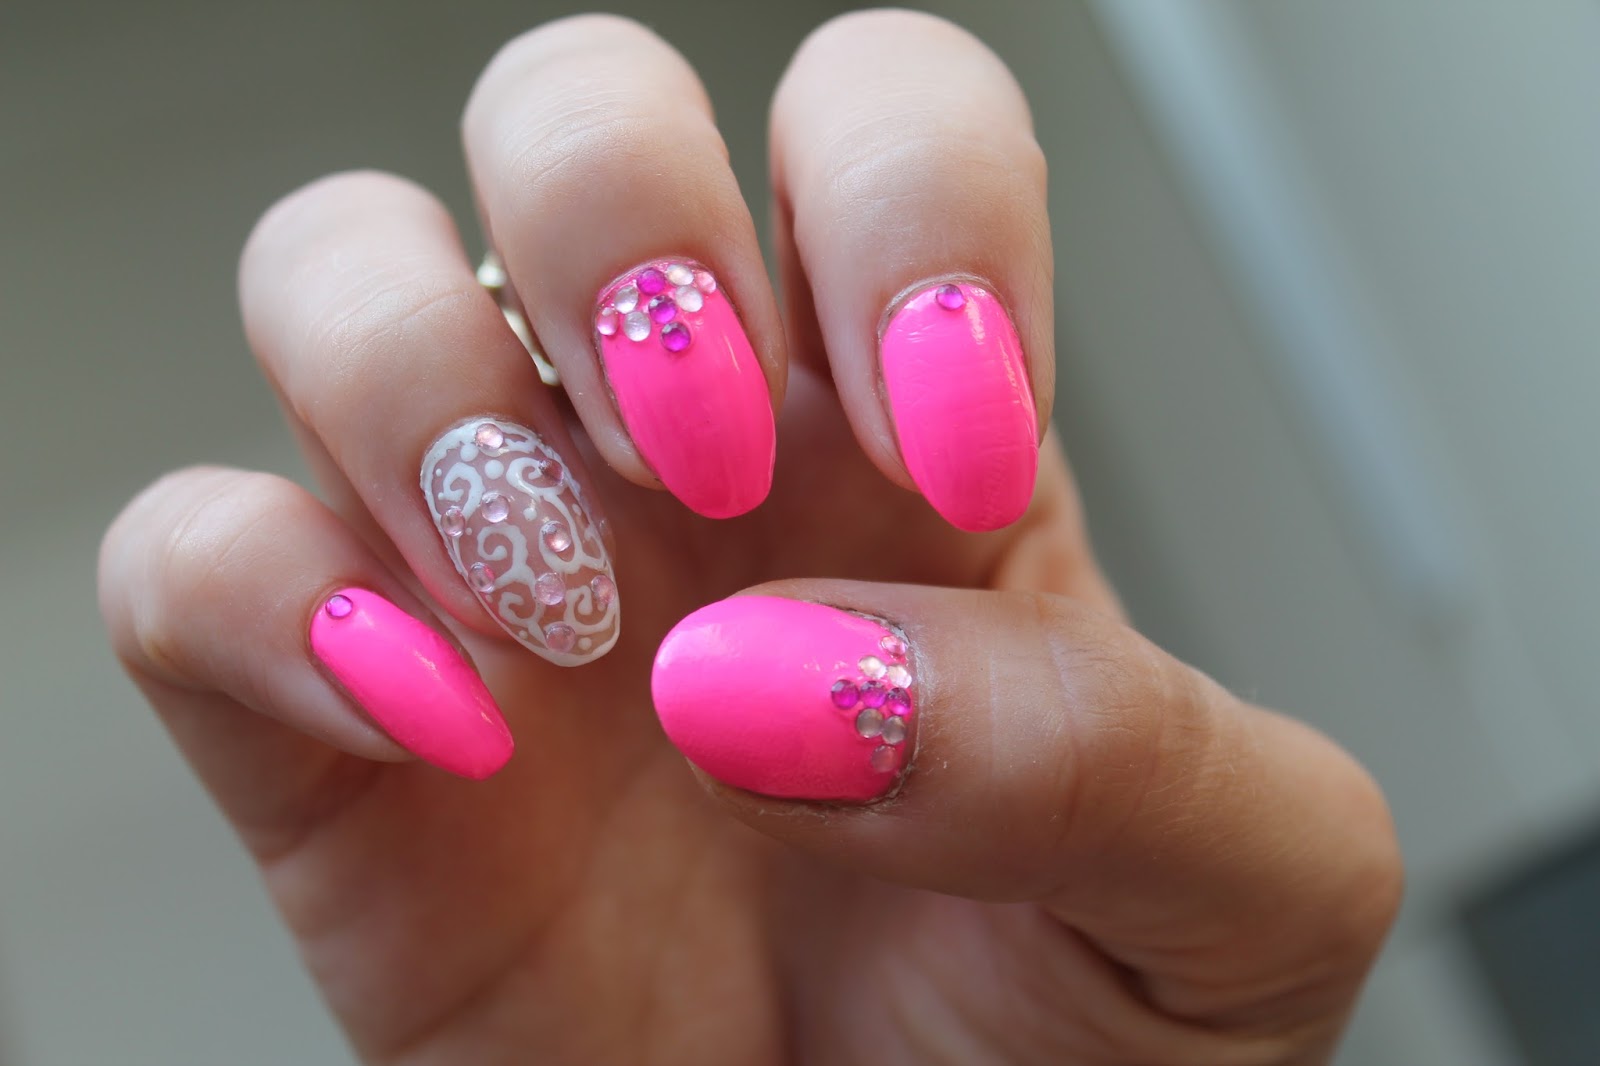 2. Simple Lace Nail Art Designs for Beginners - wide 4